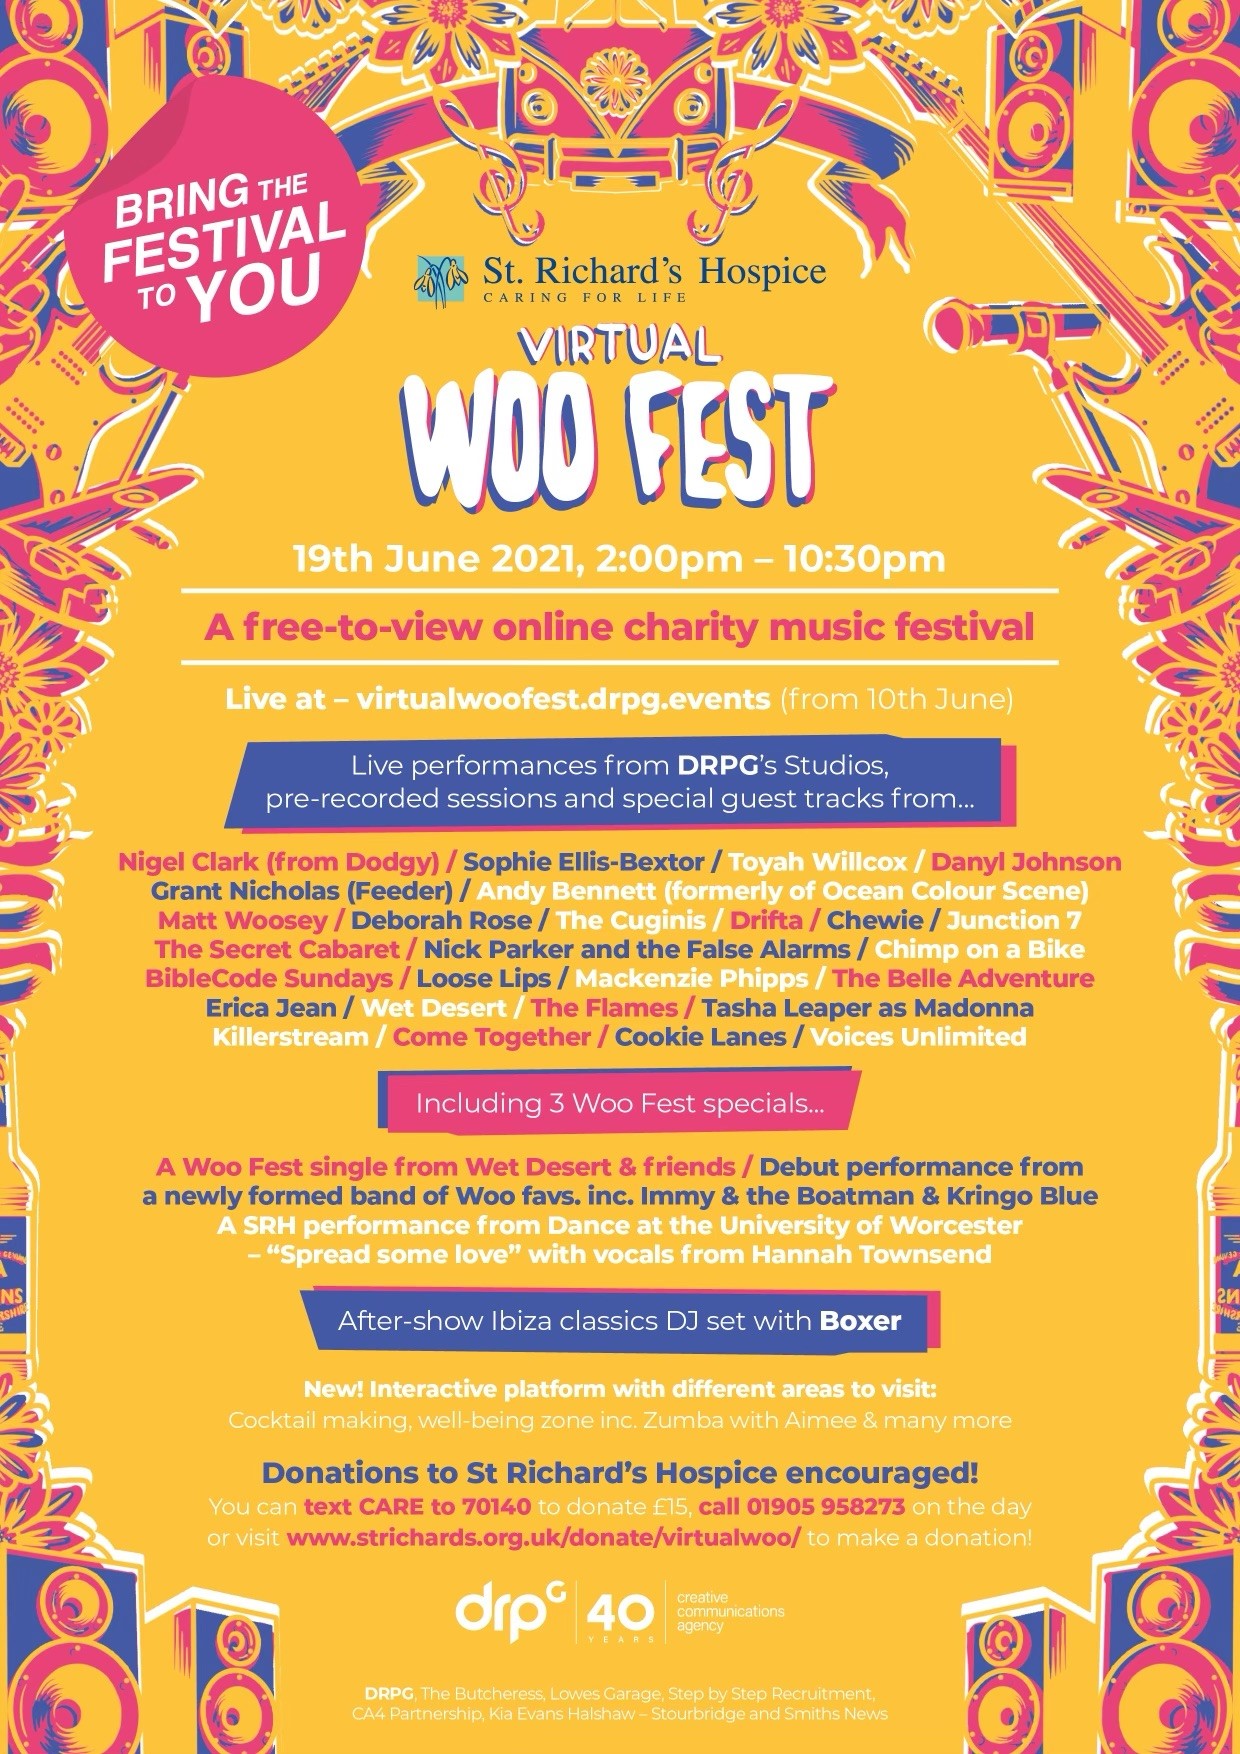 Virtual Woo Fest 21 Herefordshire & Worcestershire Chamber of Commerce